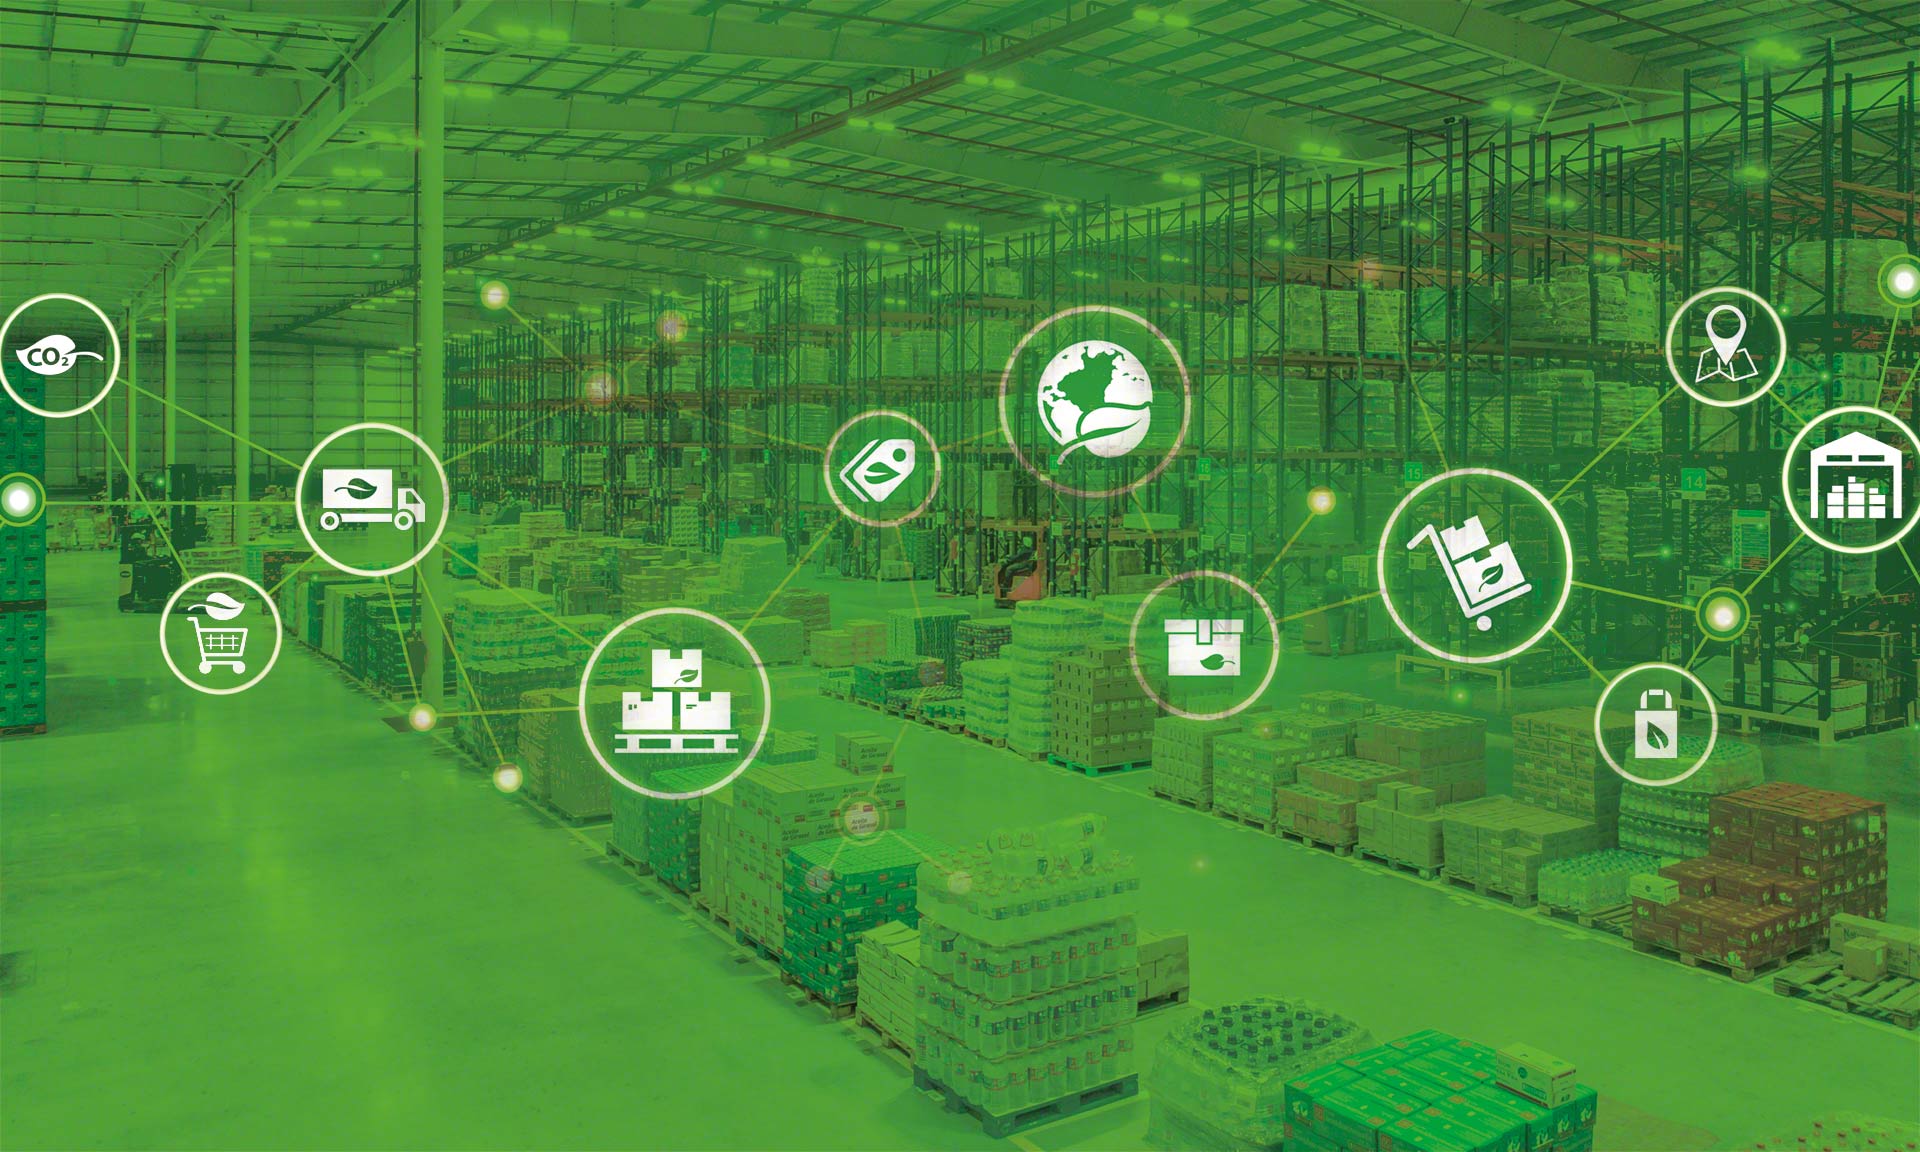 Sustainable procurement reduces costs and optimizes warehouse resources